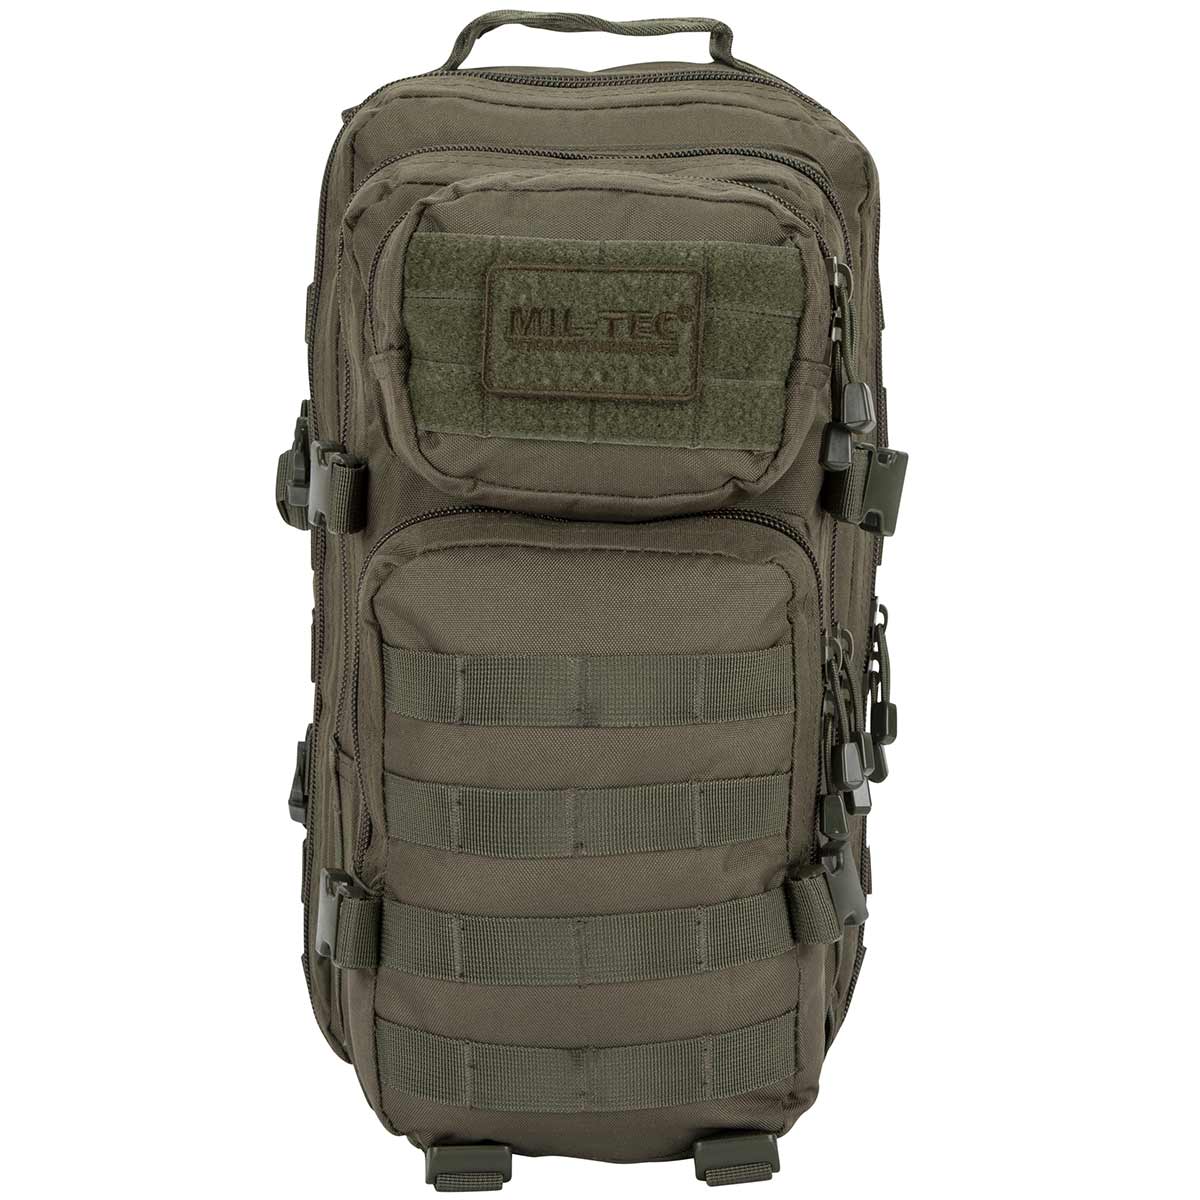 Mil-Tec MOLLE Assault Pack 20L Daysack Tactical Rucksack Military Army ...